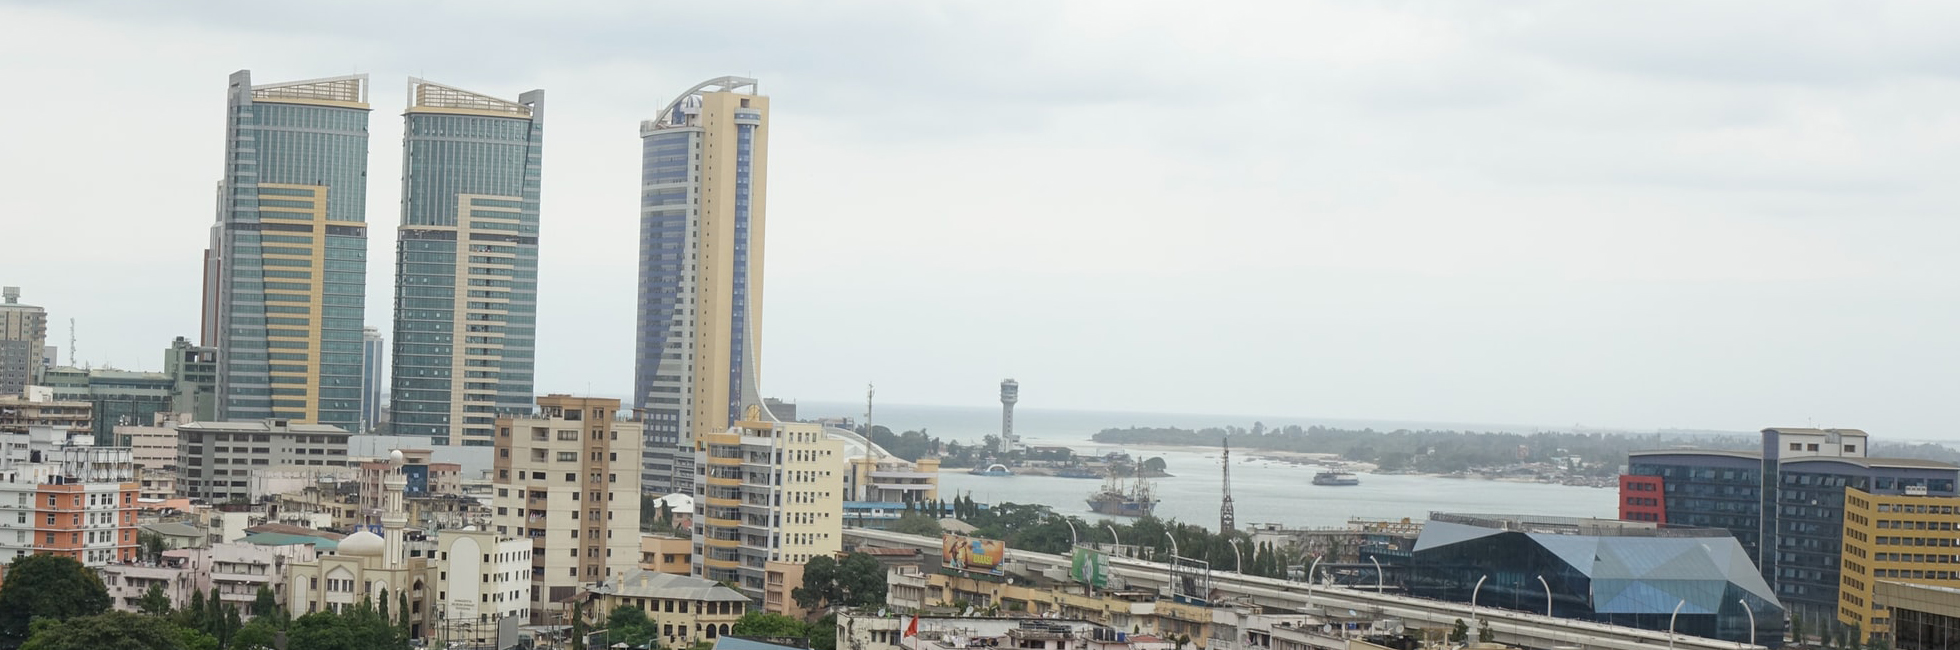 Private Equity in Tanzania: Highlight of Recent Legislative Changes